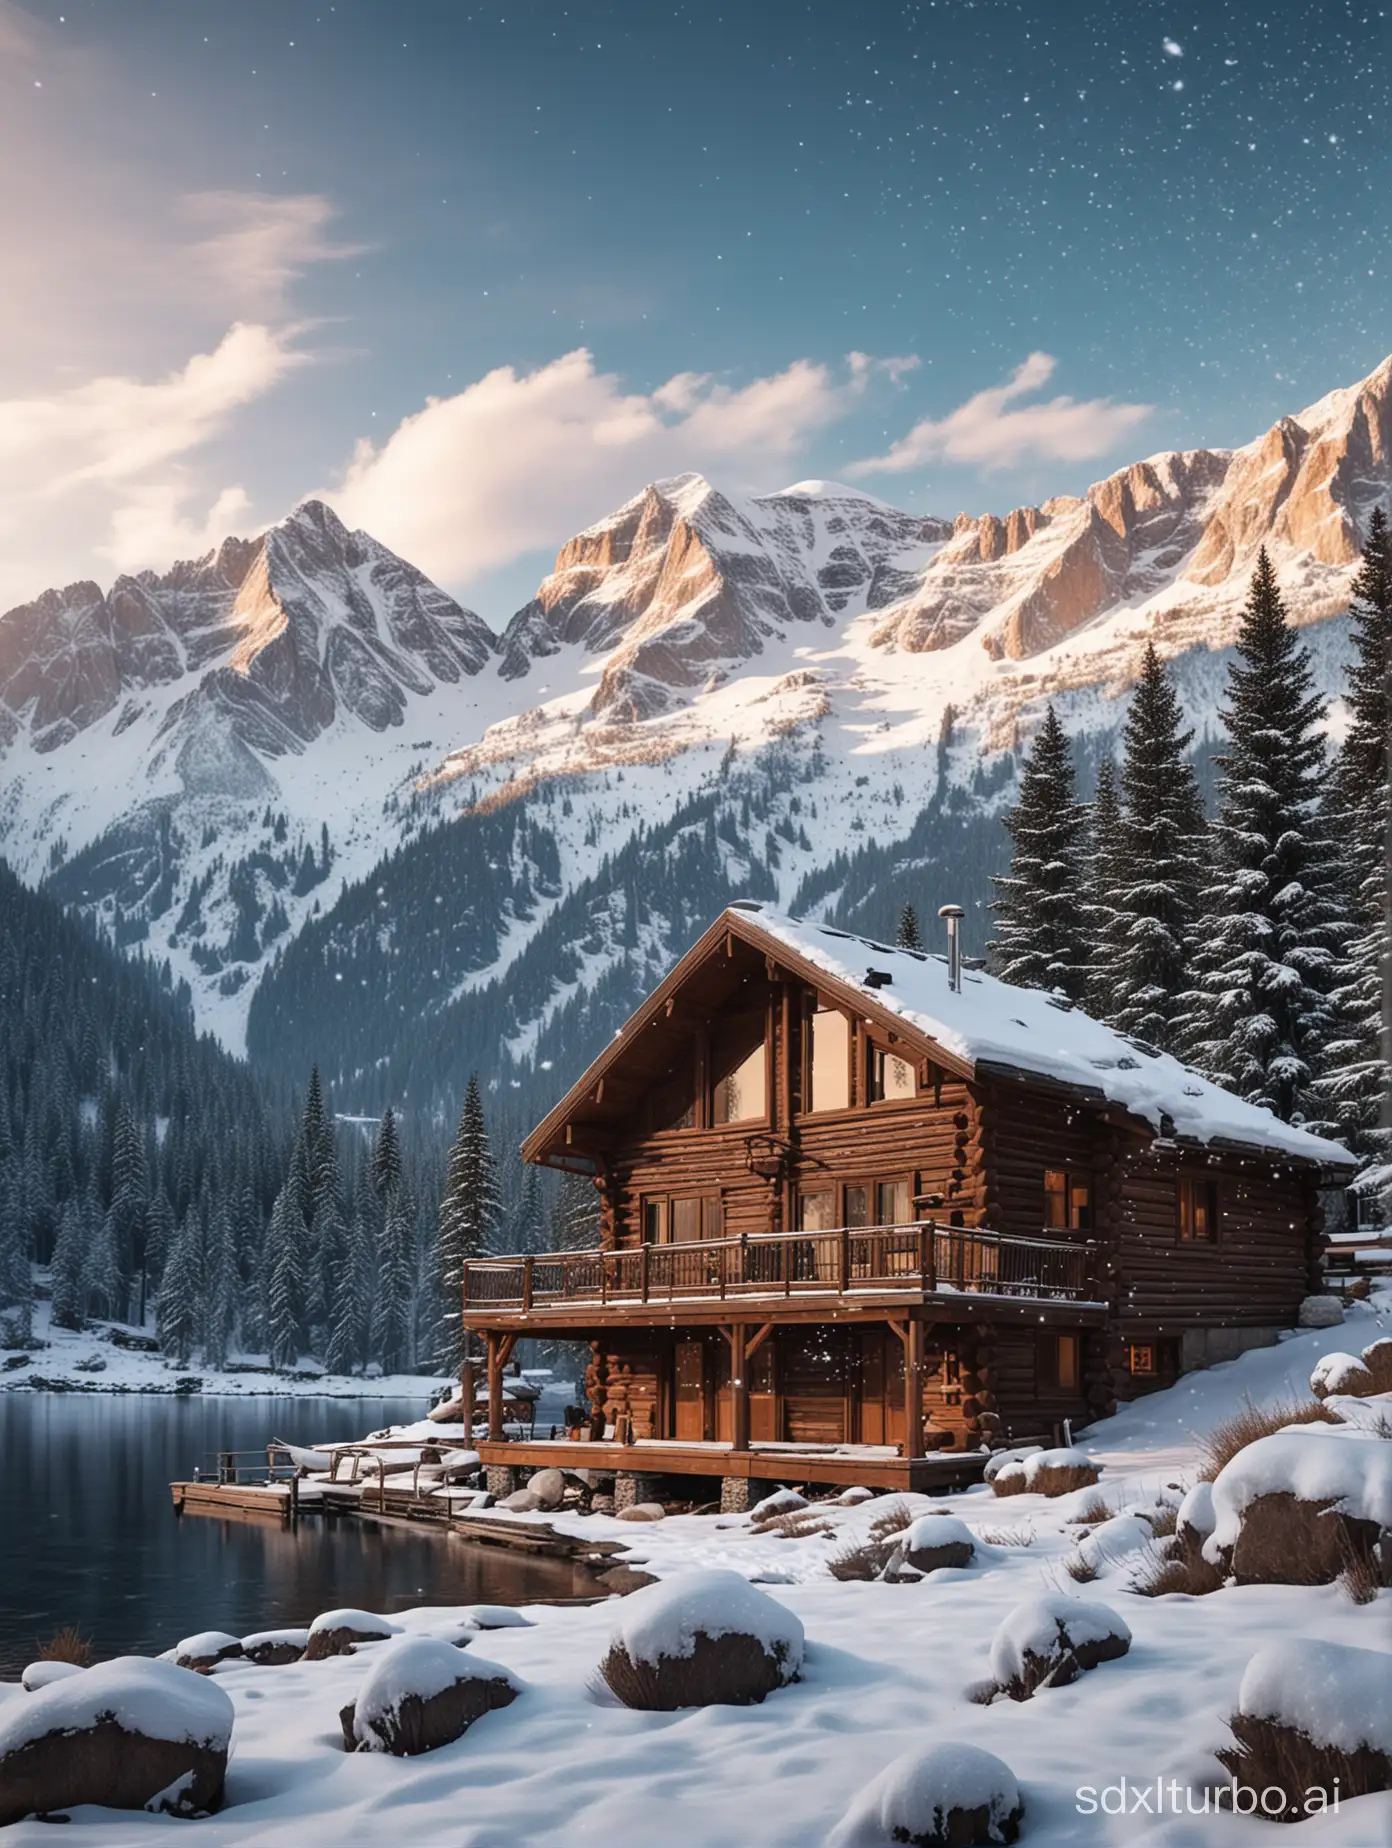 Comfortable cabin, majestic snow capped mountains, snowflakes floating in the sky